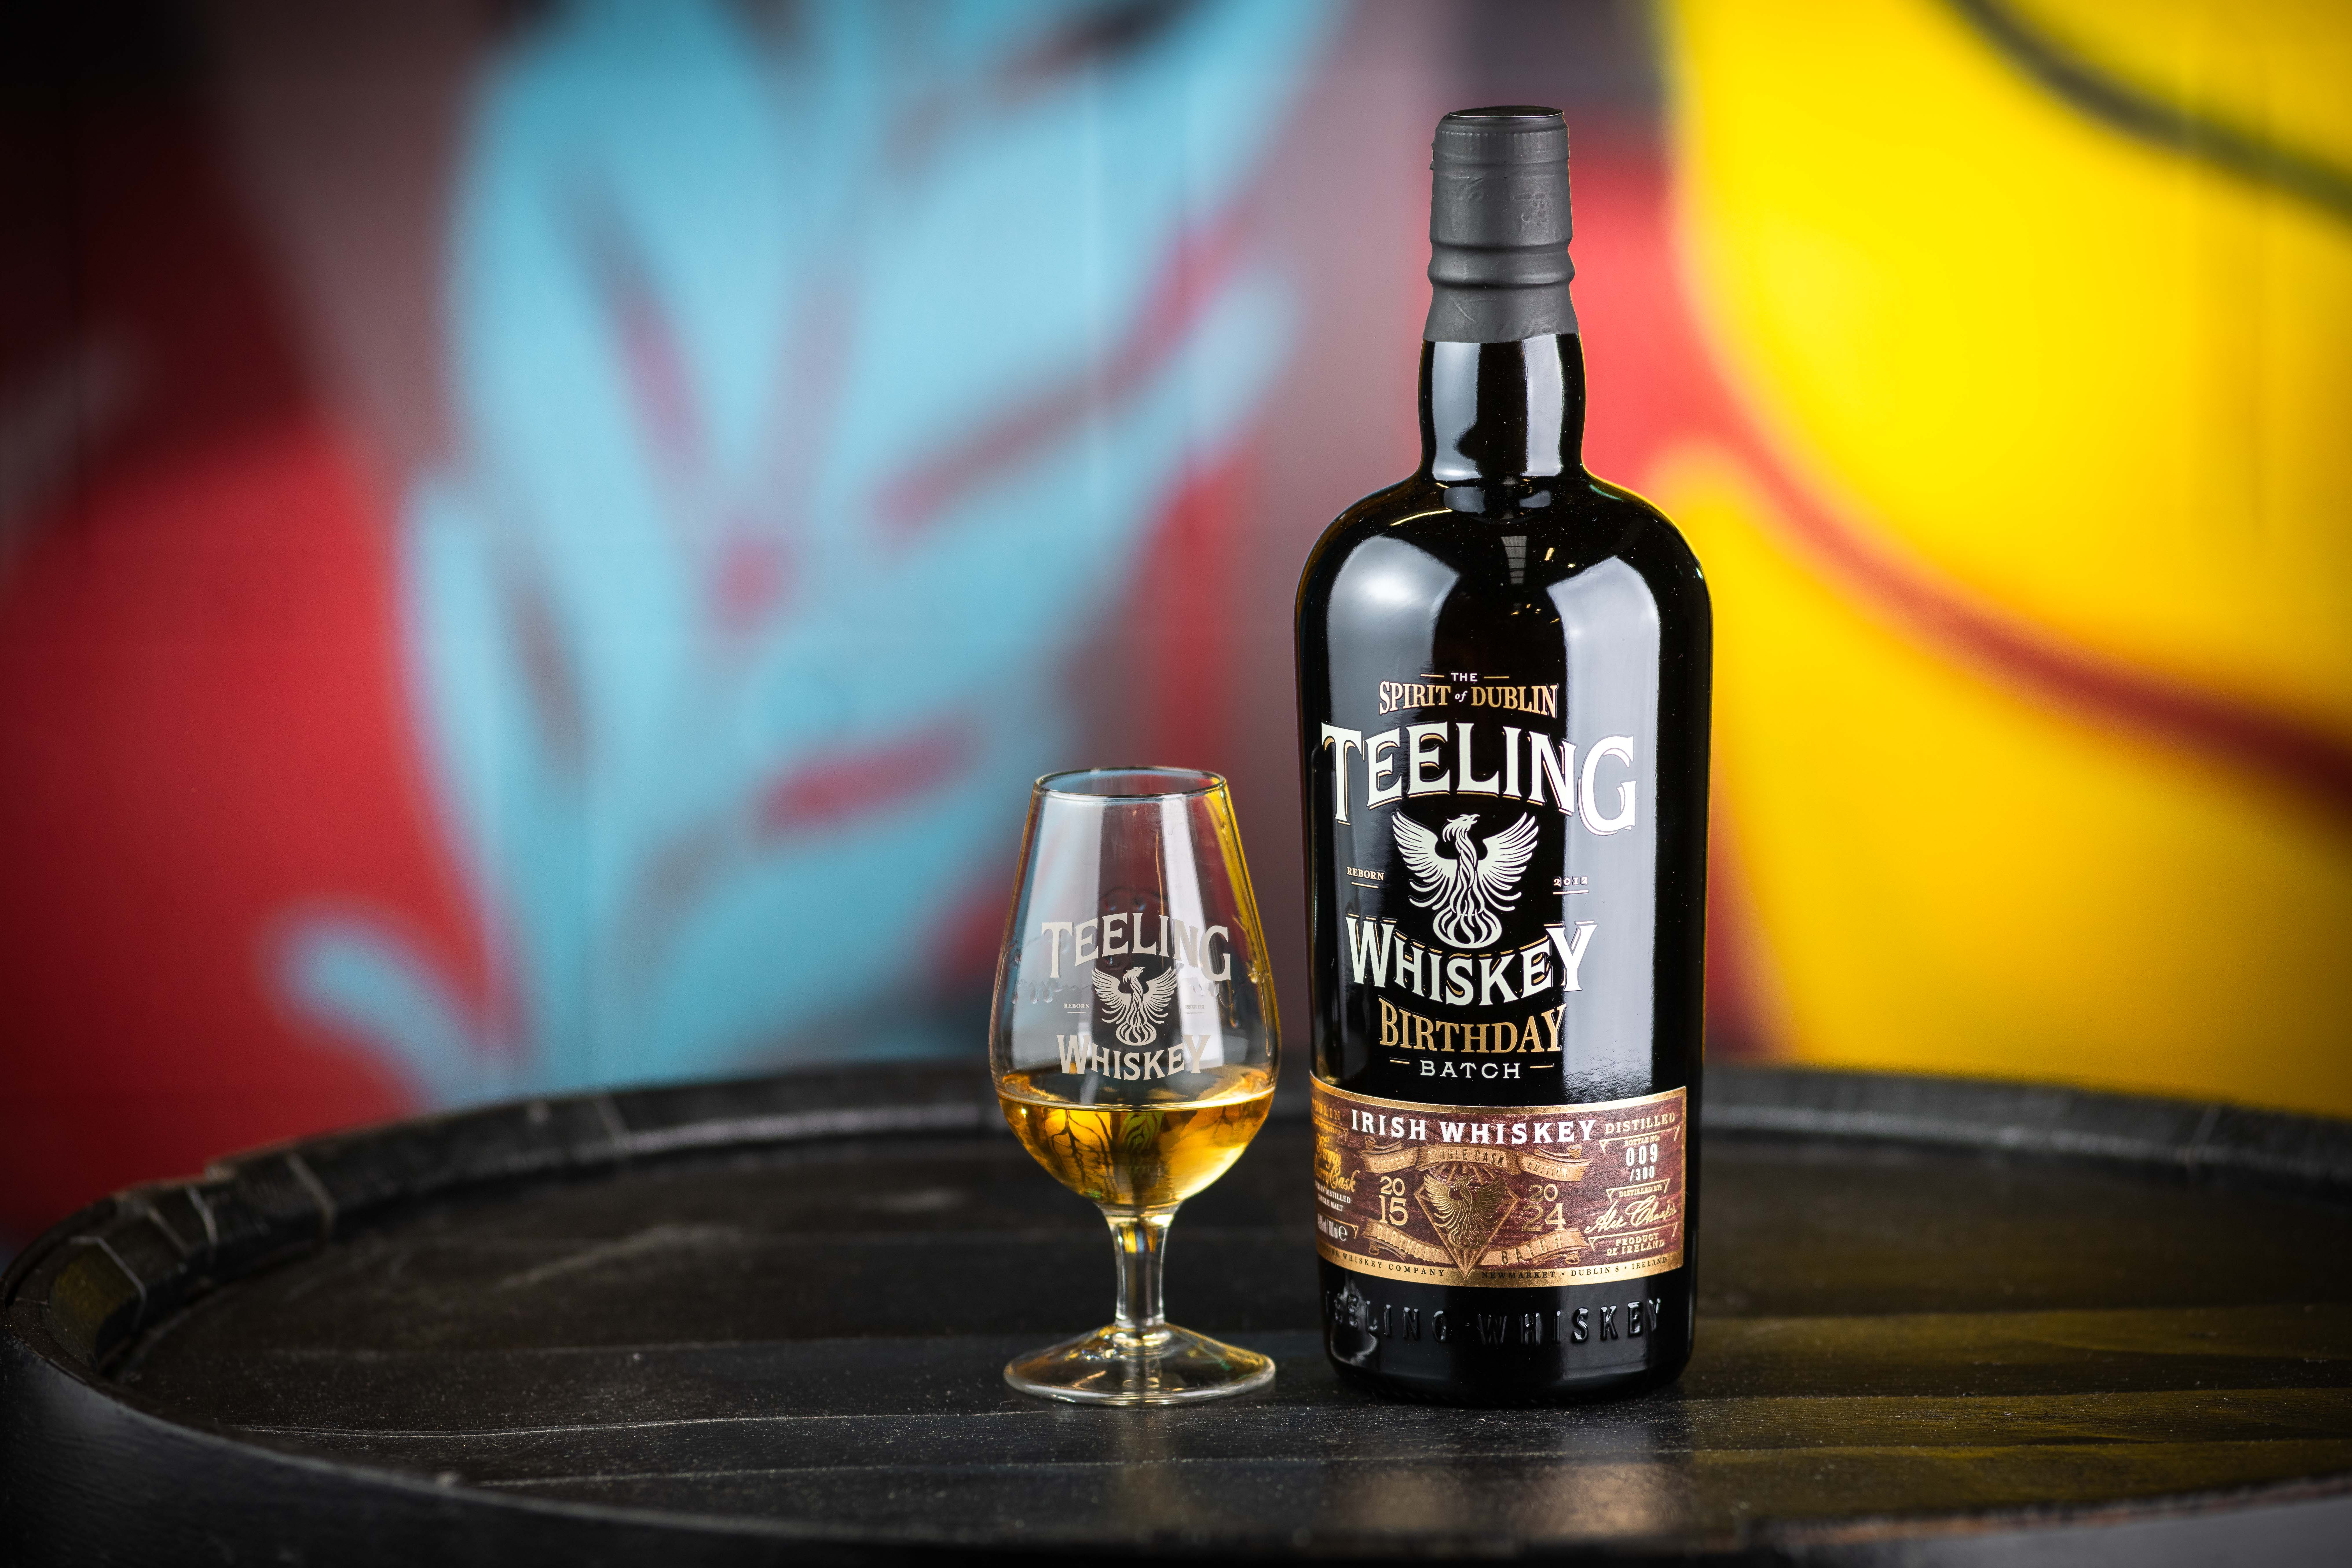 Teeling 9th Birthday Batch in front of colourful street art